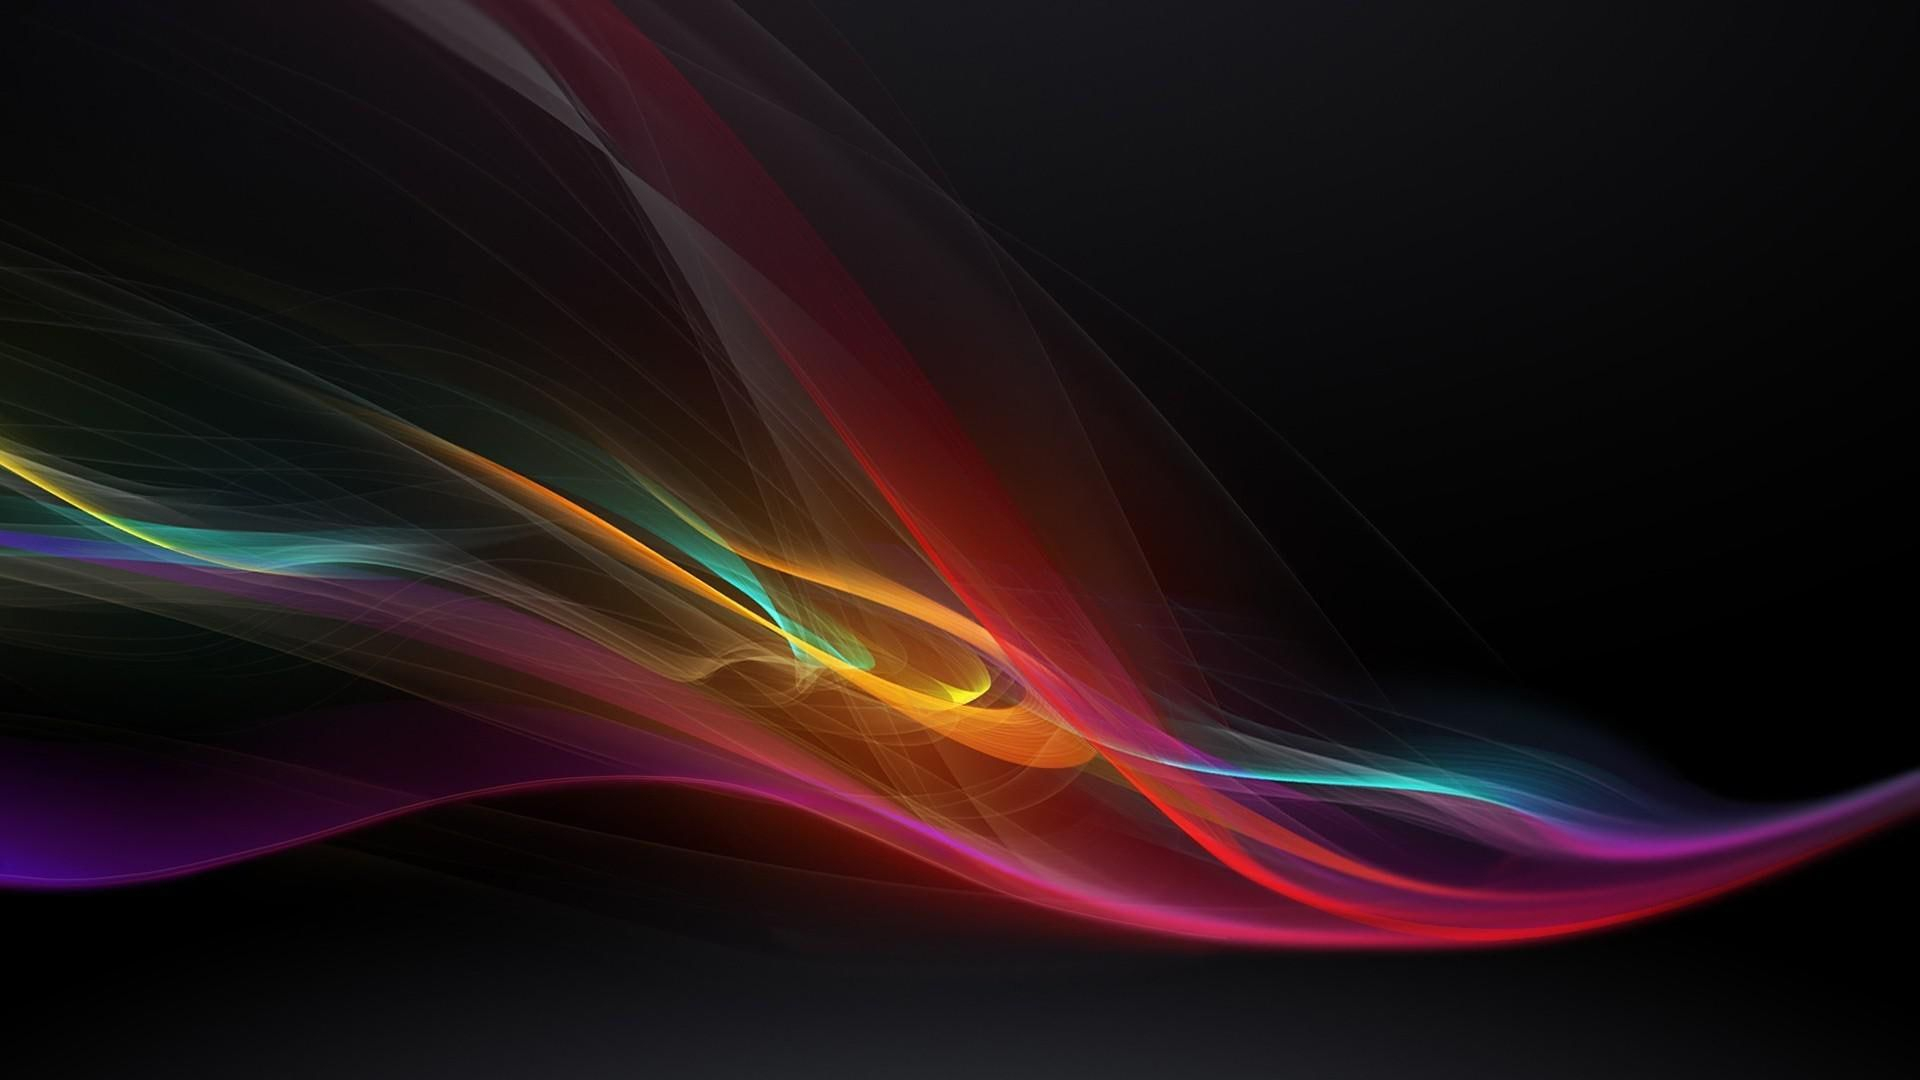 1920x1080 HD wallpaper: Neon translucent curves, red and yellow smoke, abstract, in 2022 | Wallpaper backgrounds, Blue abstract painting, Smoke painting